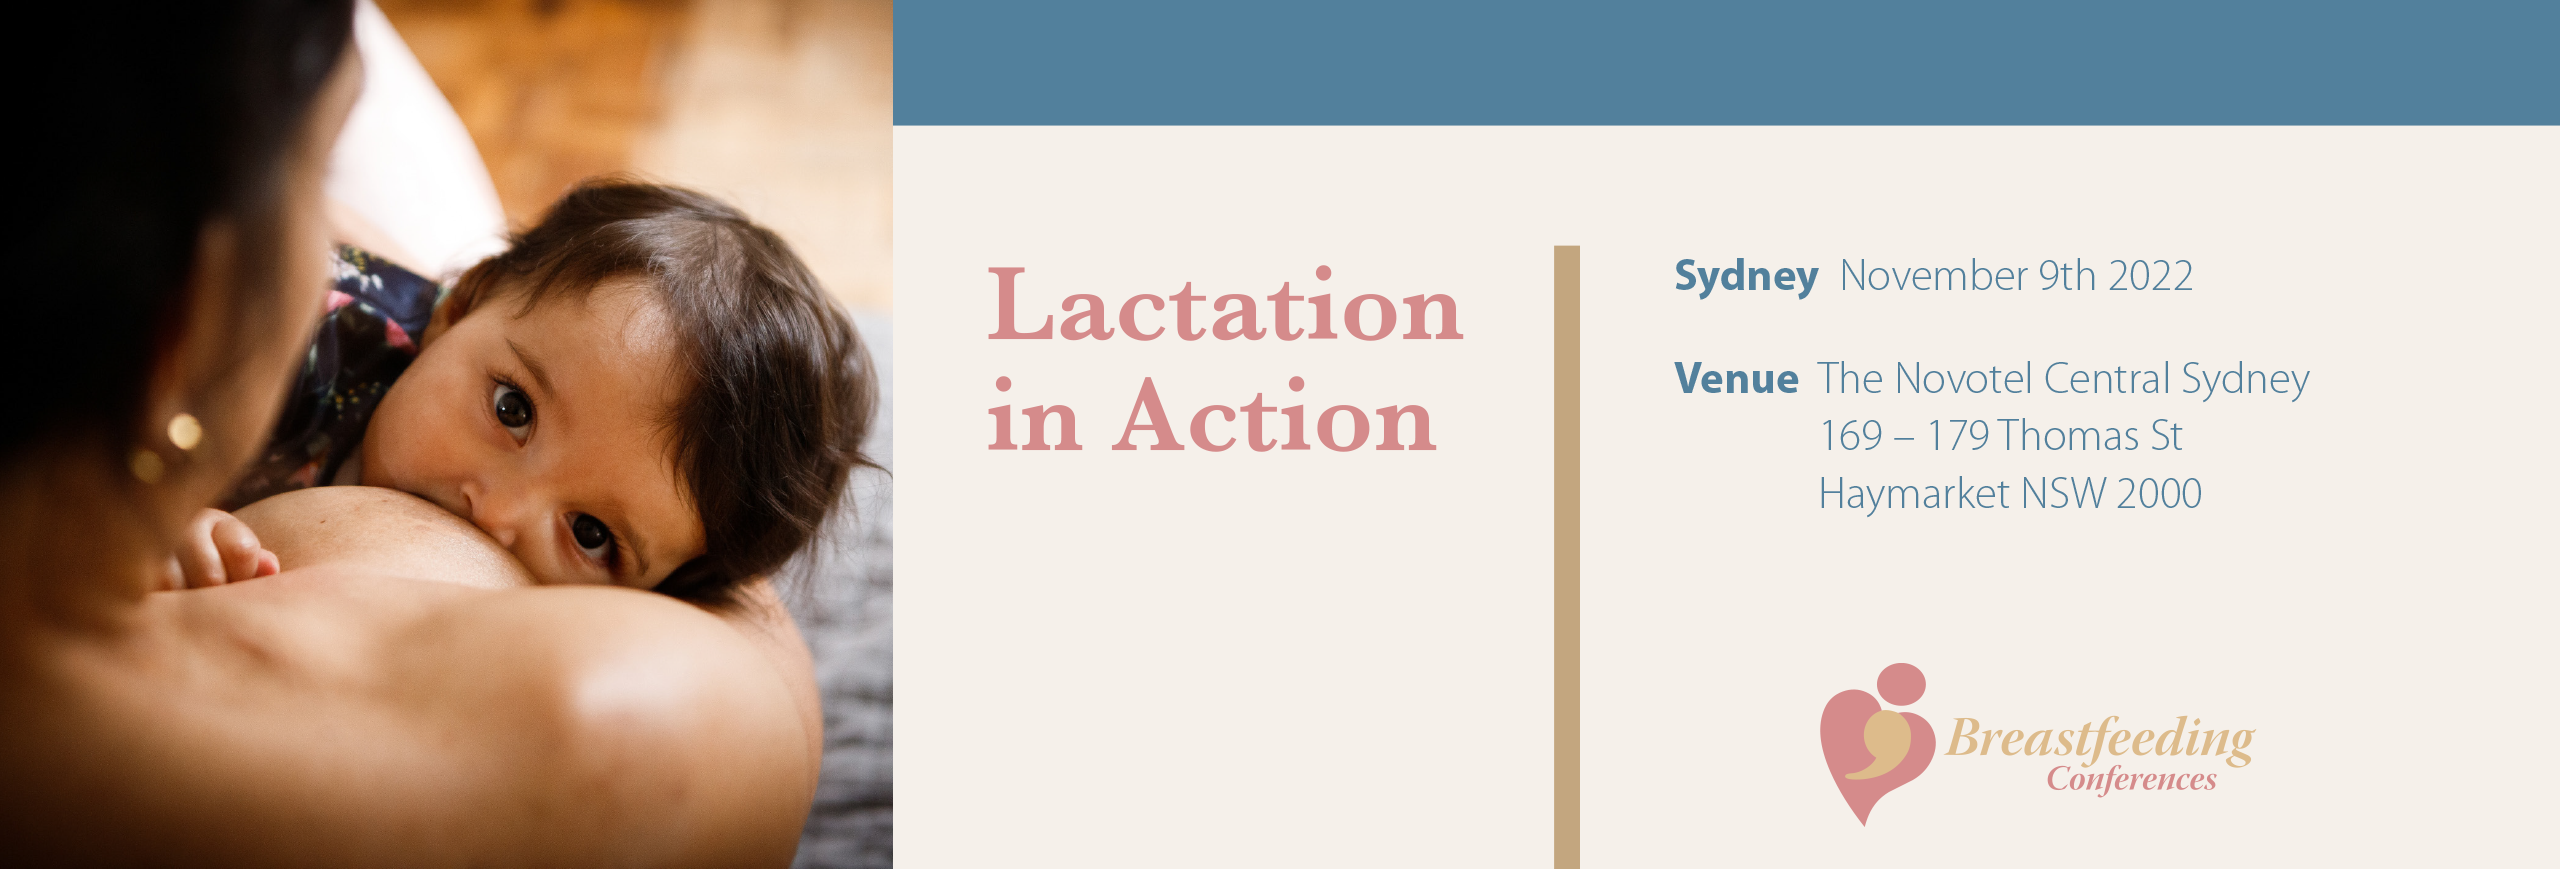 Lactation in Action - Sydney